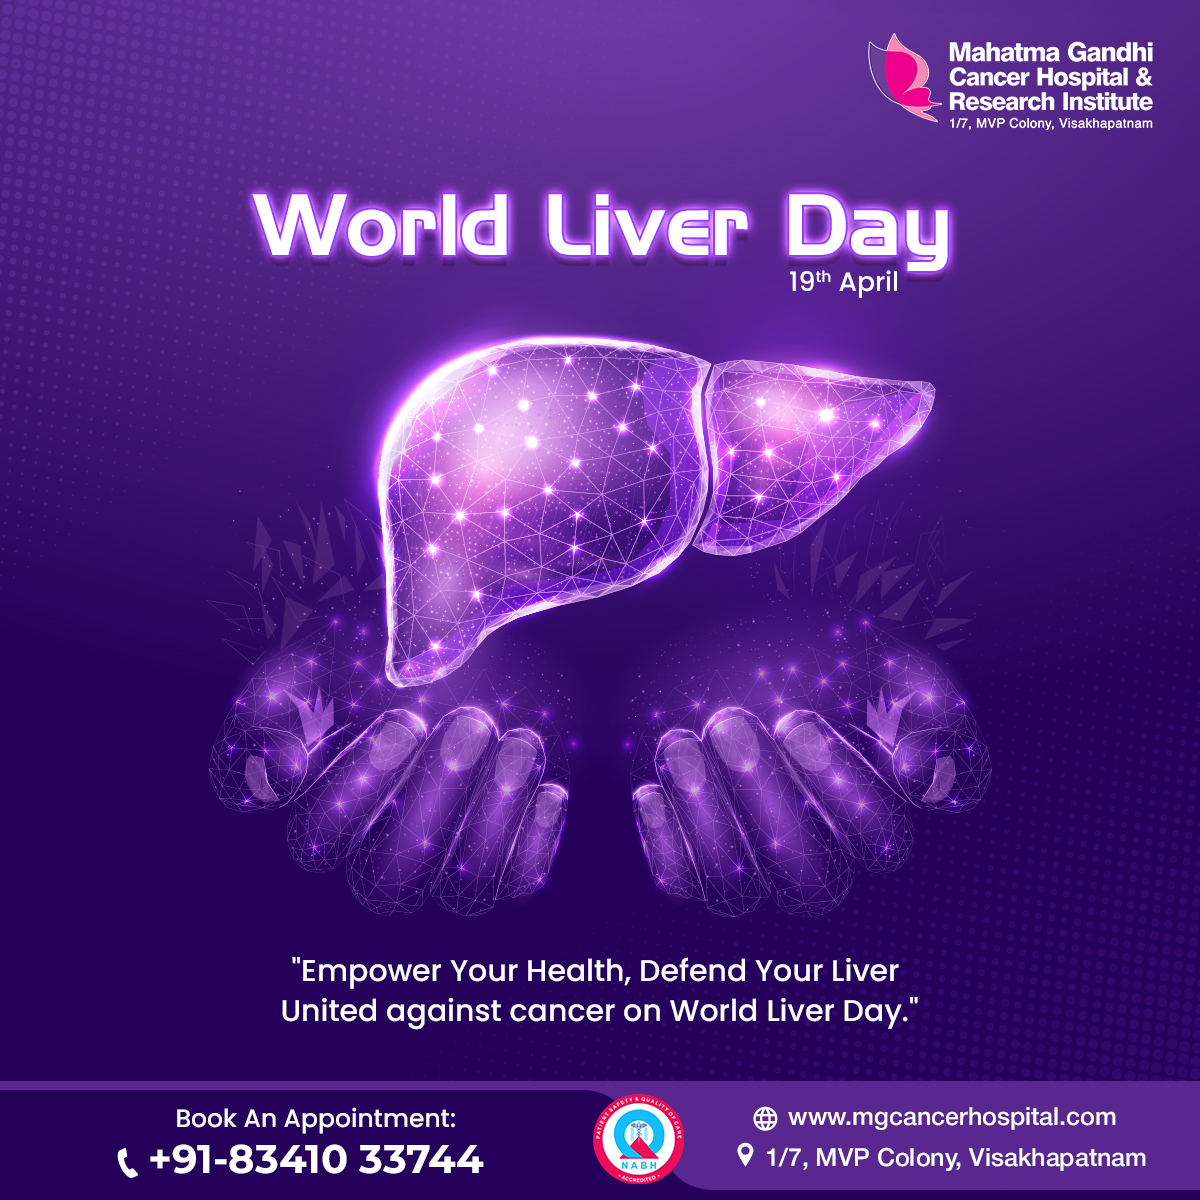 Guarding Your Liver, Protecting Your Life – World Liver Day with a pledge to cancer prevention. 
#WorldLiverDay #CancerCare #LiverHealth #LoveYourLiver #LiverAwareness #LiverDisease #FightLiverDisease #LiverCare #HealthyLiver #LiverWellness #ProtectYourLive   #MGCHRI